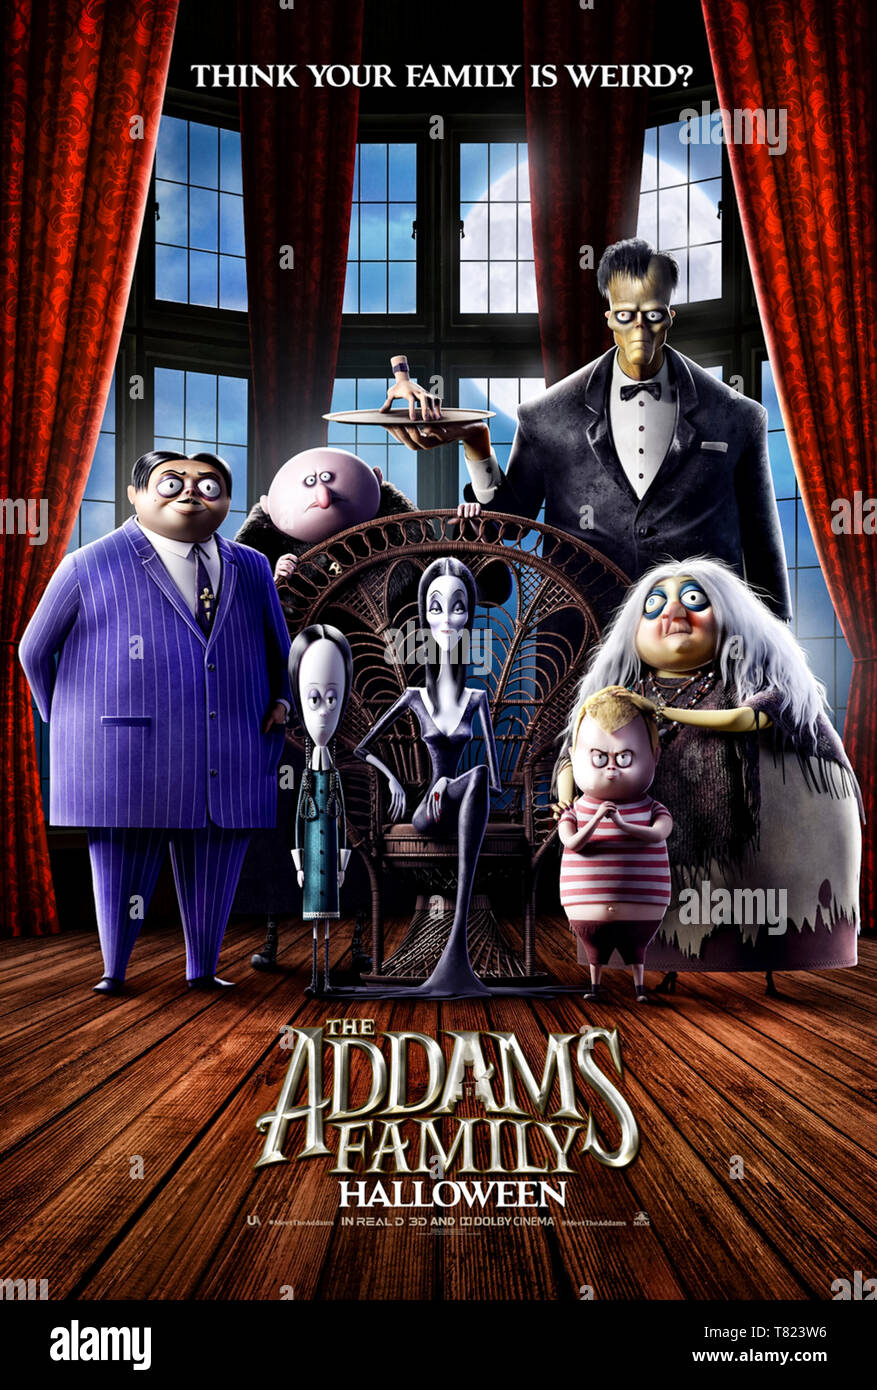 The Addams Family (2019) directed by Greg Tiernan and Conrad Vernon and starring Charlize Theron, Chloë Grace Moretz, Oscar Isaac and Aimee Garcia. Animated version based on the characters from Charles Addams' New Yorker cartoons. Stock Photo